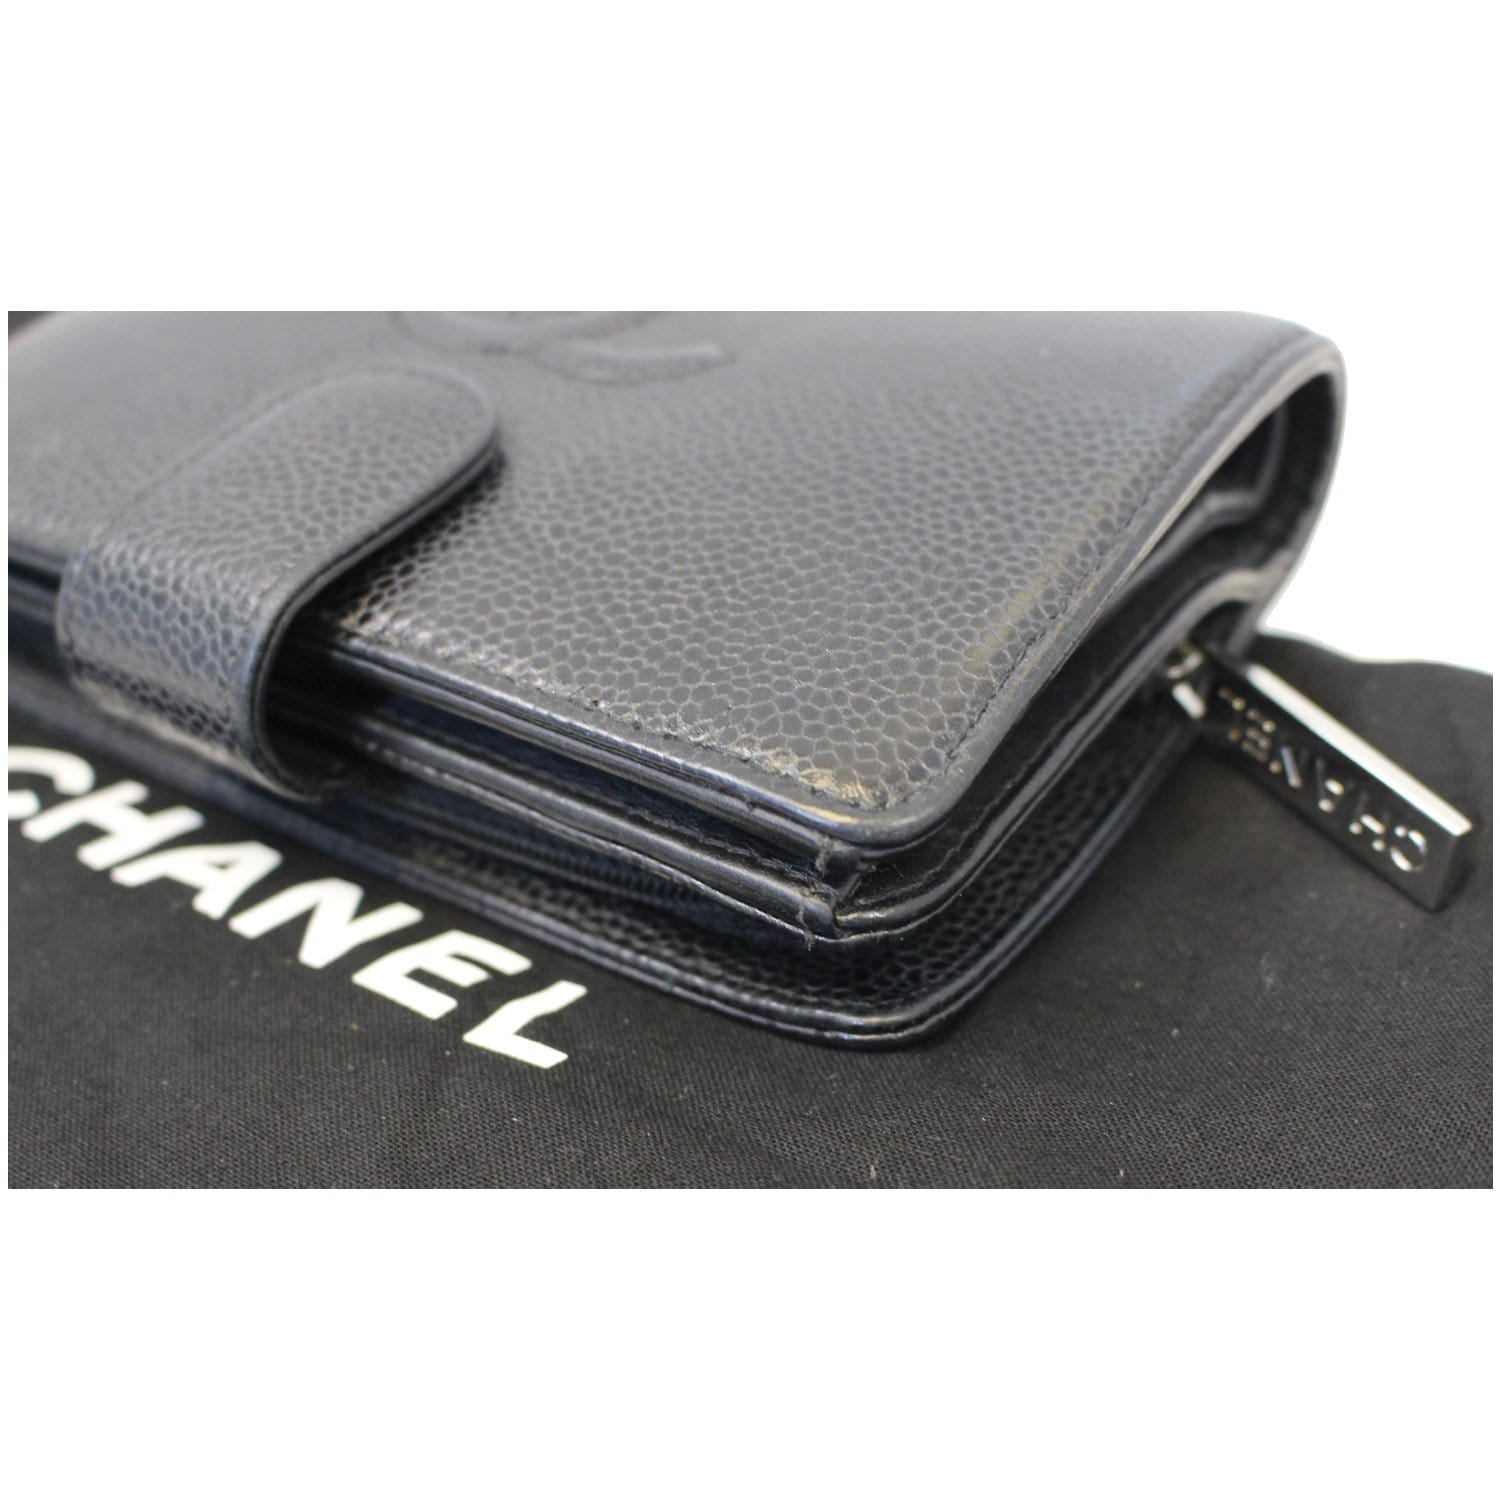 Chanel Black Caviar Leather Bifold Wallet at Jill's Consignment